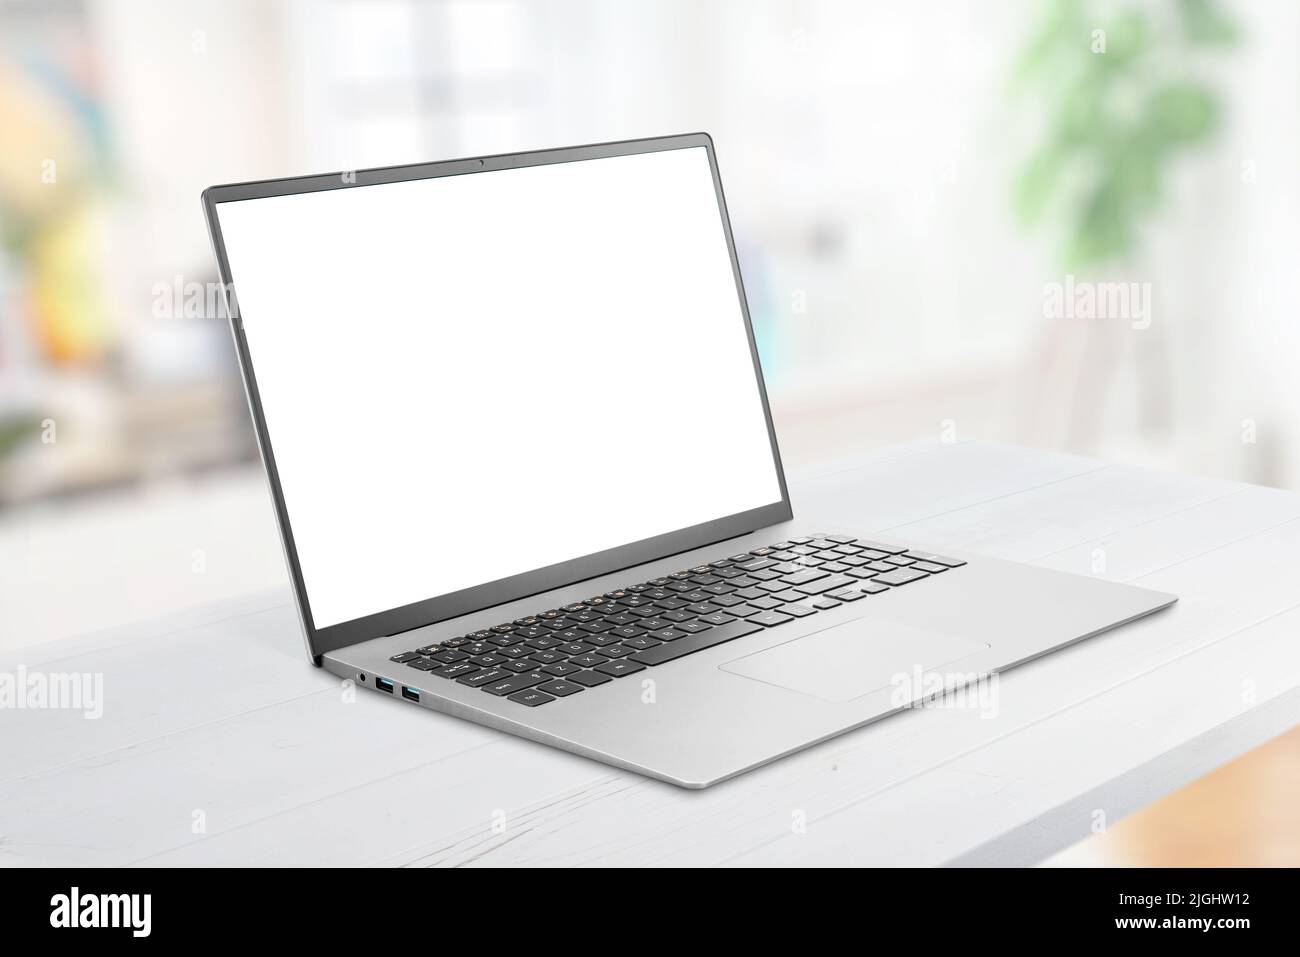 Laptop mockup on office desk. Isolated screen for web page promotion. Clean flat desk. Iluminated office in background Stock Photo